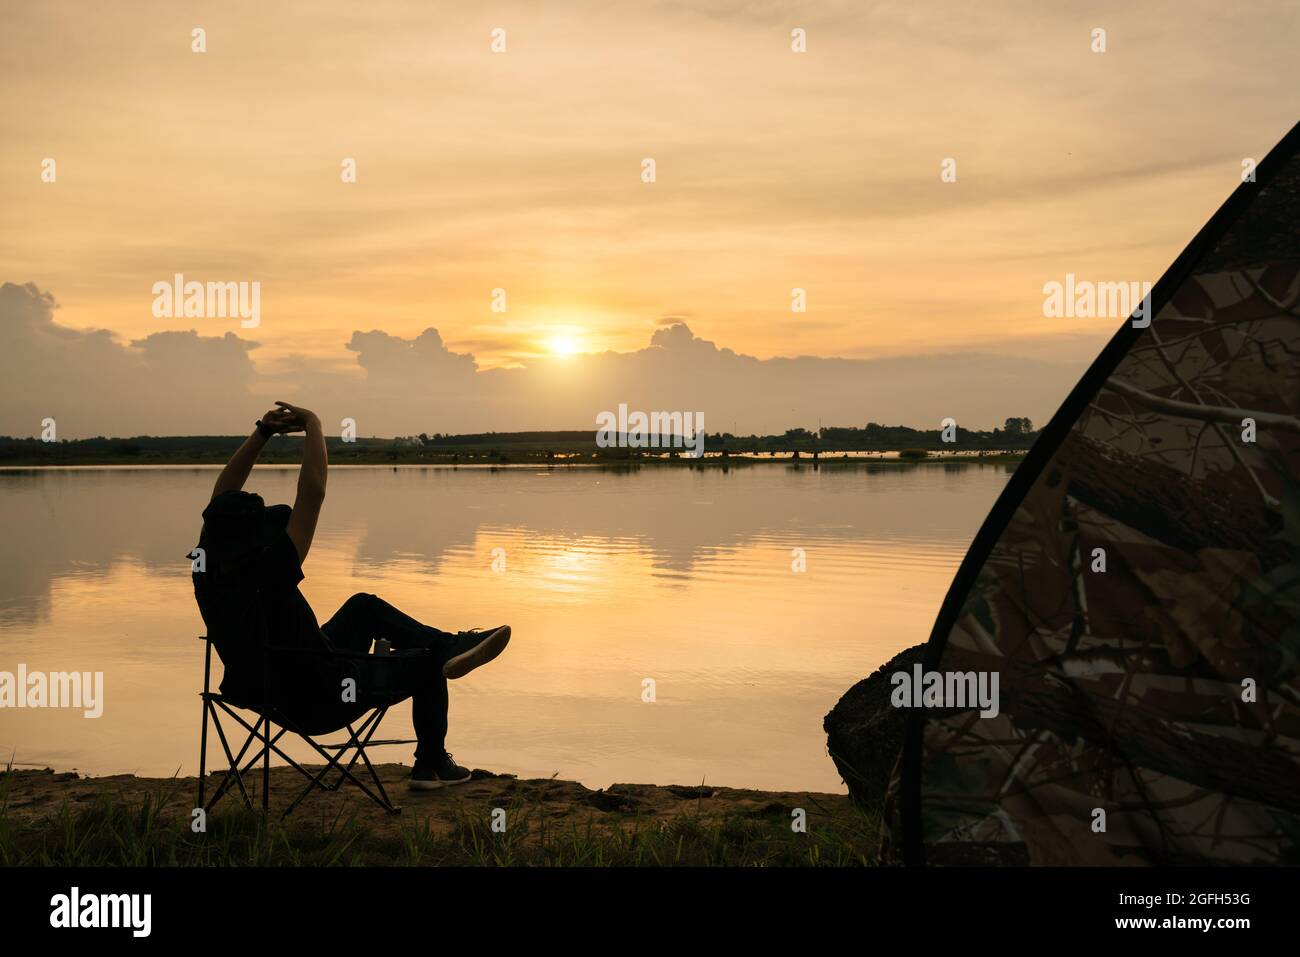 Asian young man traveler relax, enjoying sunset scenery view of the river landscape, sitting in touristic chair. Travel camping and adventure lifestyl Stock Photo